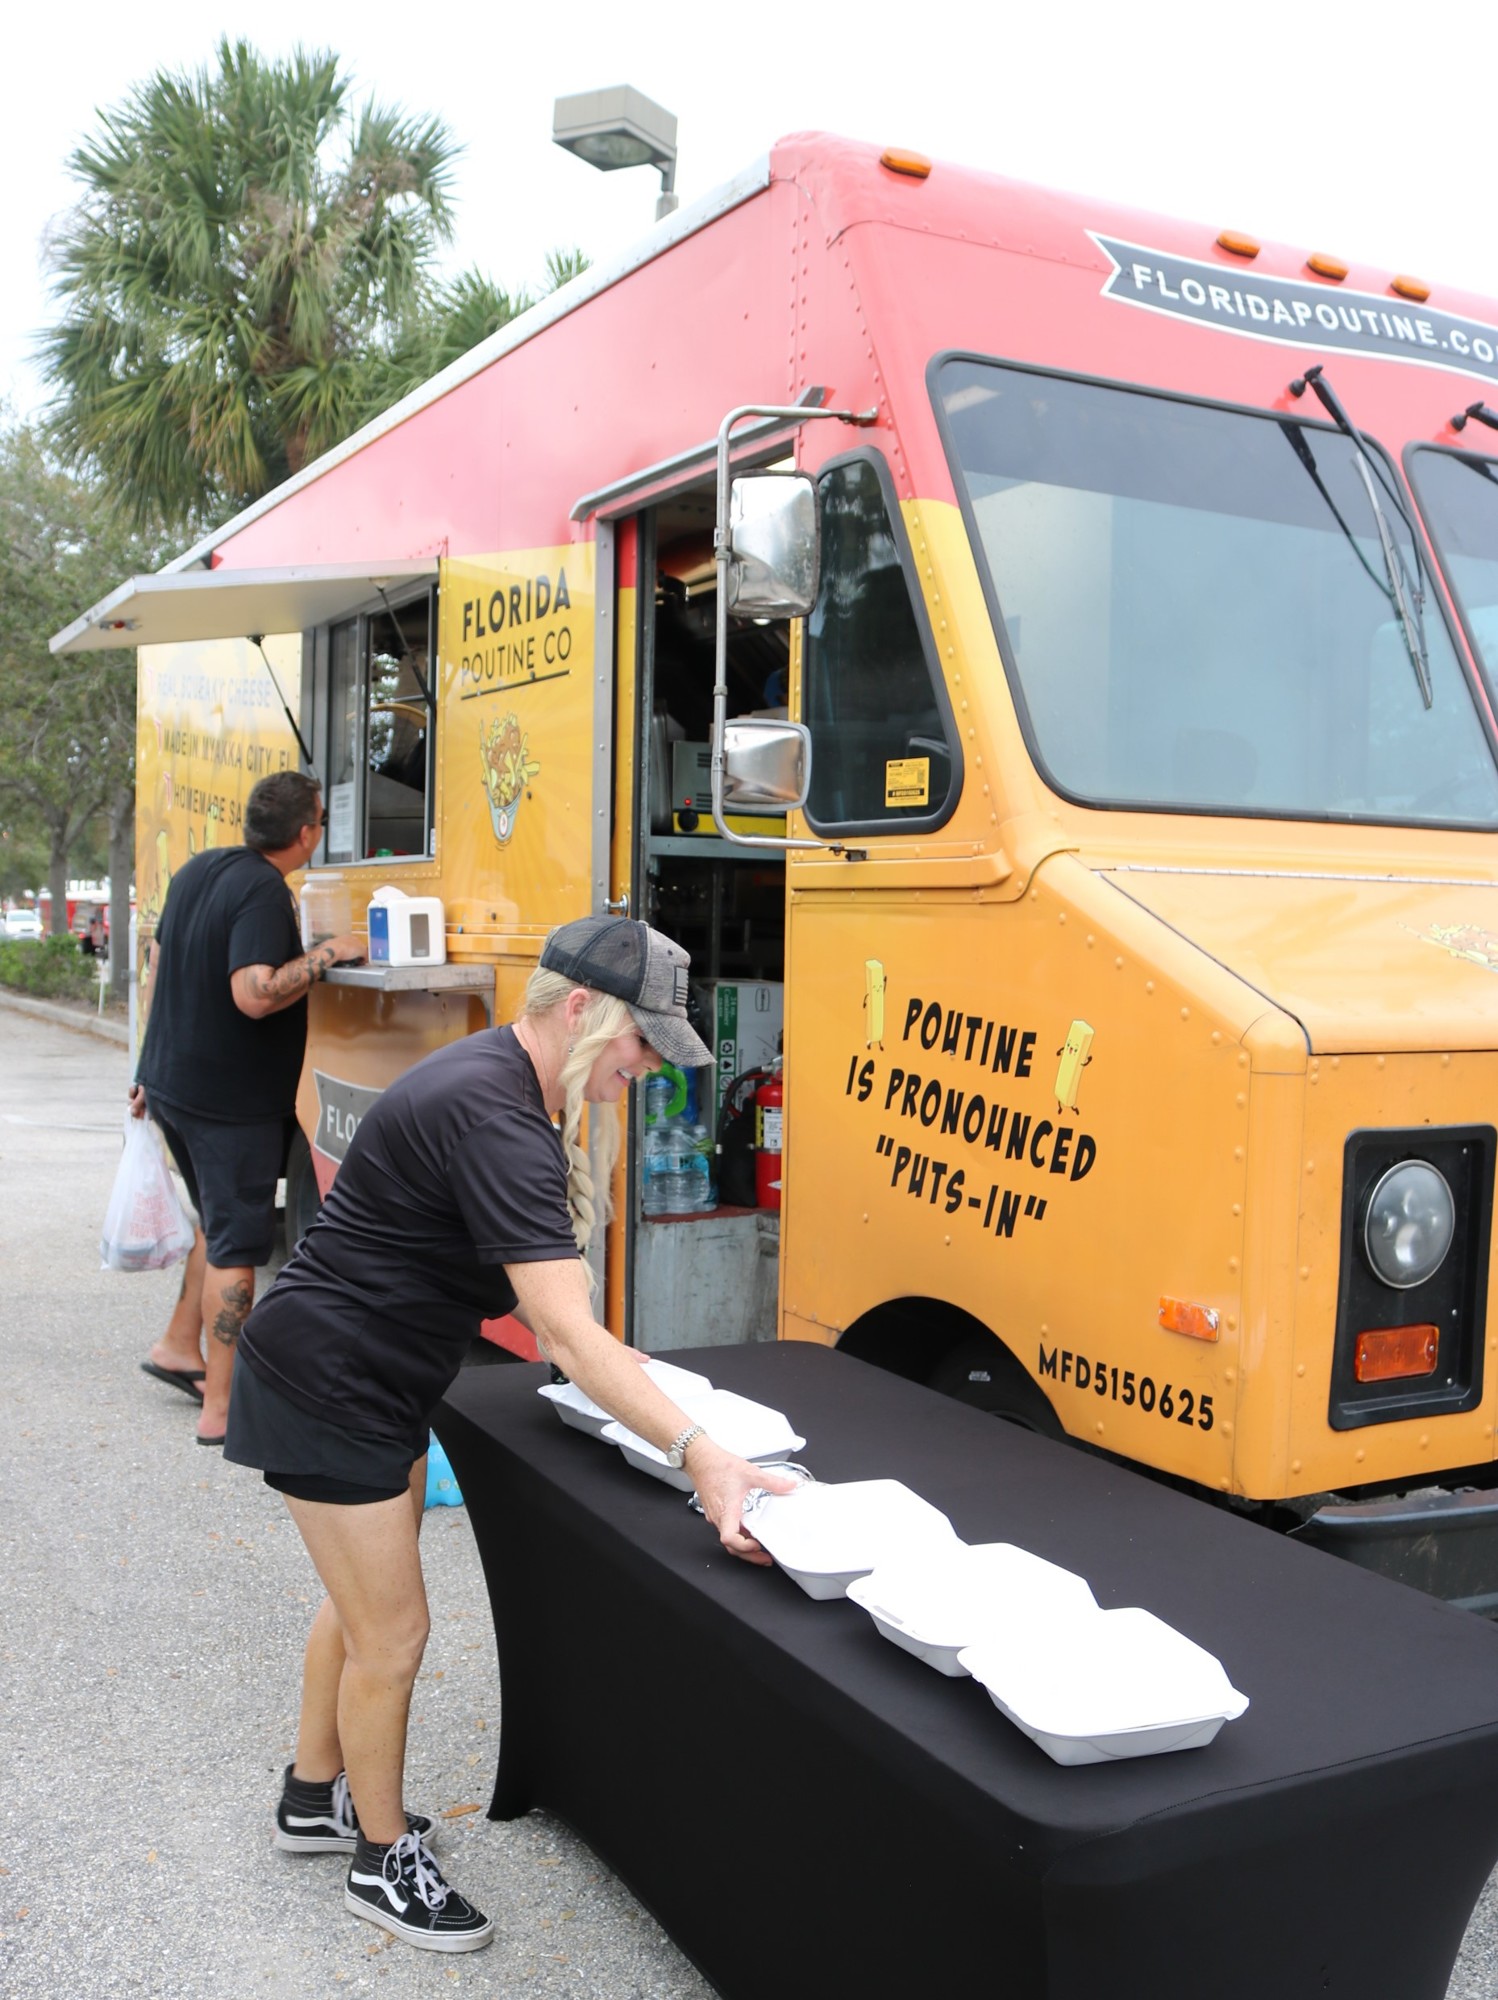 JFCS of the Suncoast recently held its own food truck fundraiser event for groups on Oct. 13. Courtesy photo.